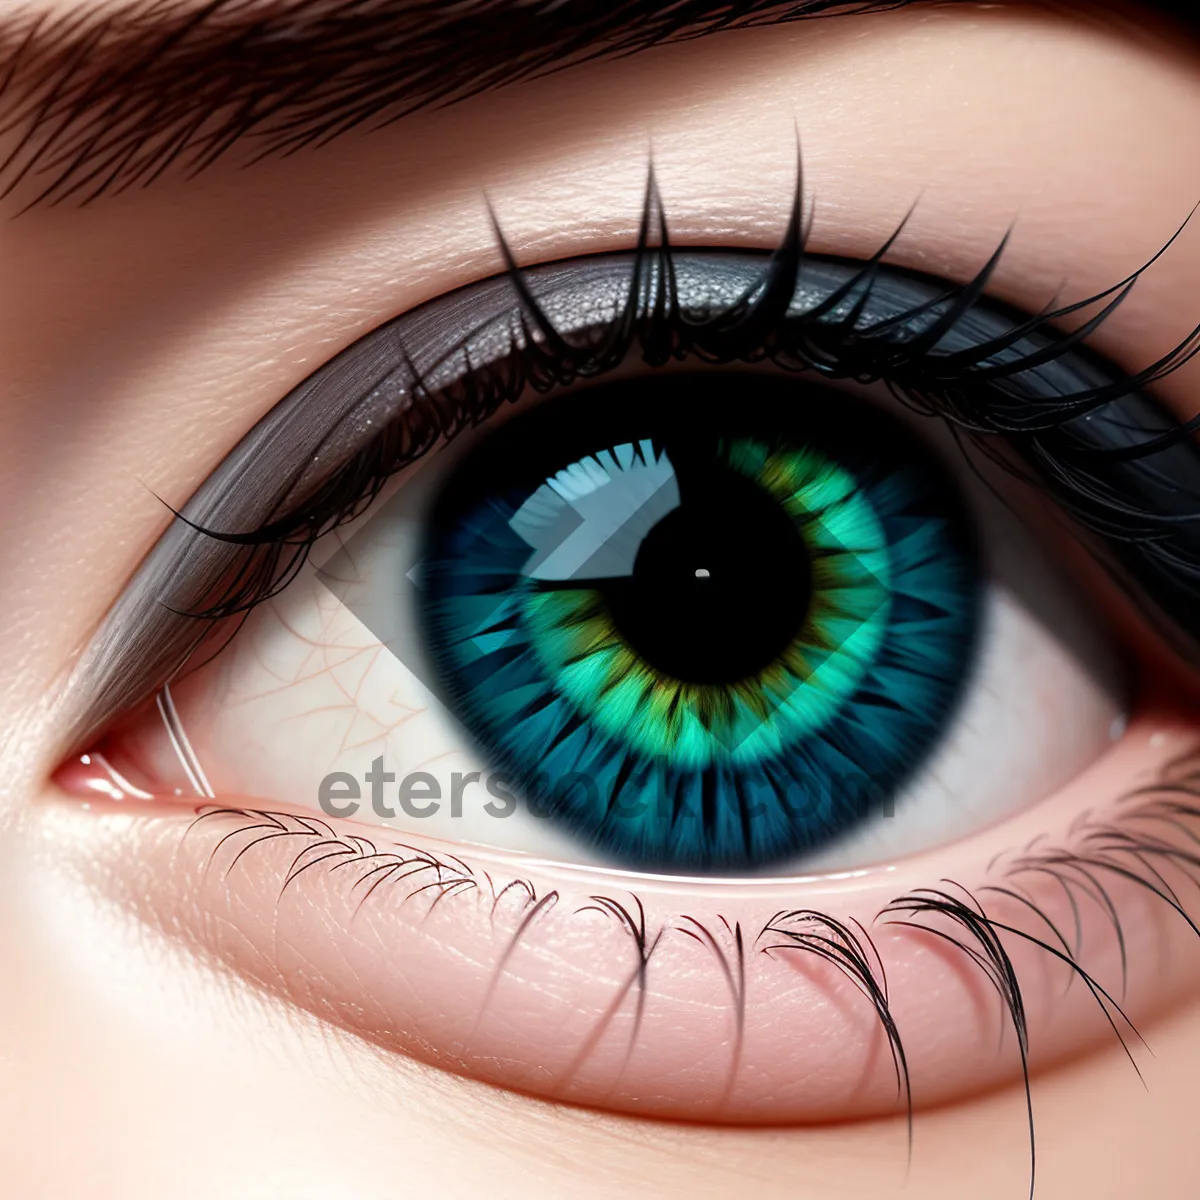 Picture of Captivating Eye Vision - Close-up Gaze with Beautiful Iris